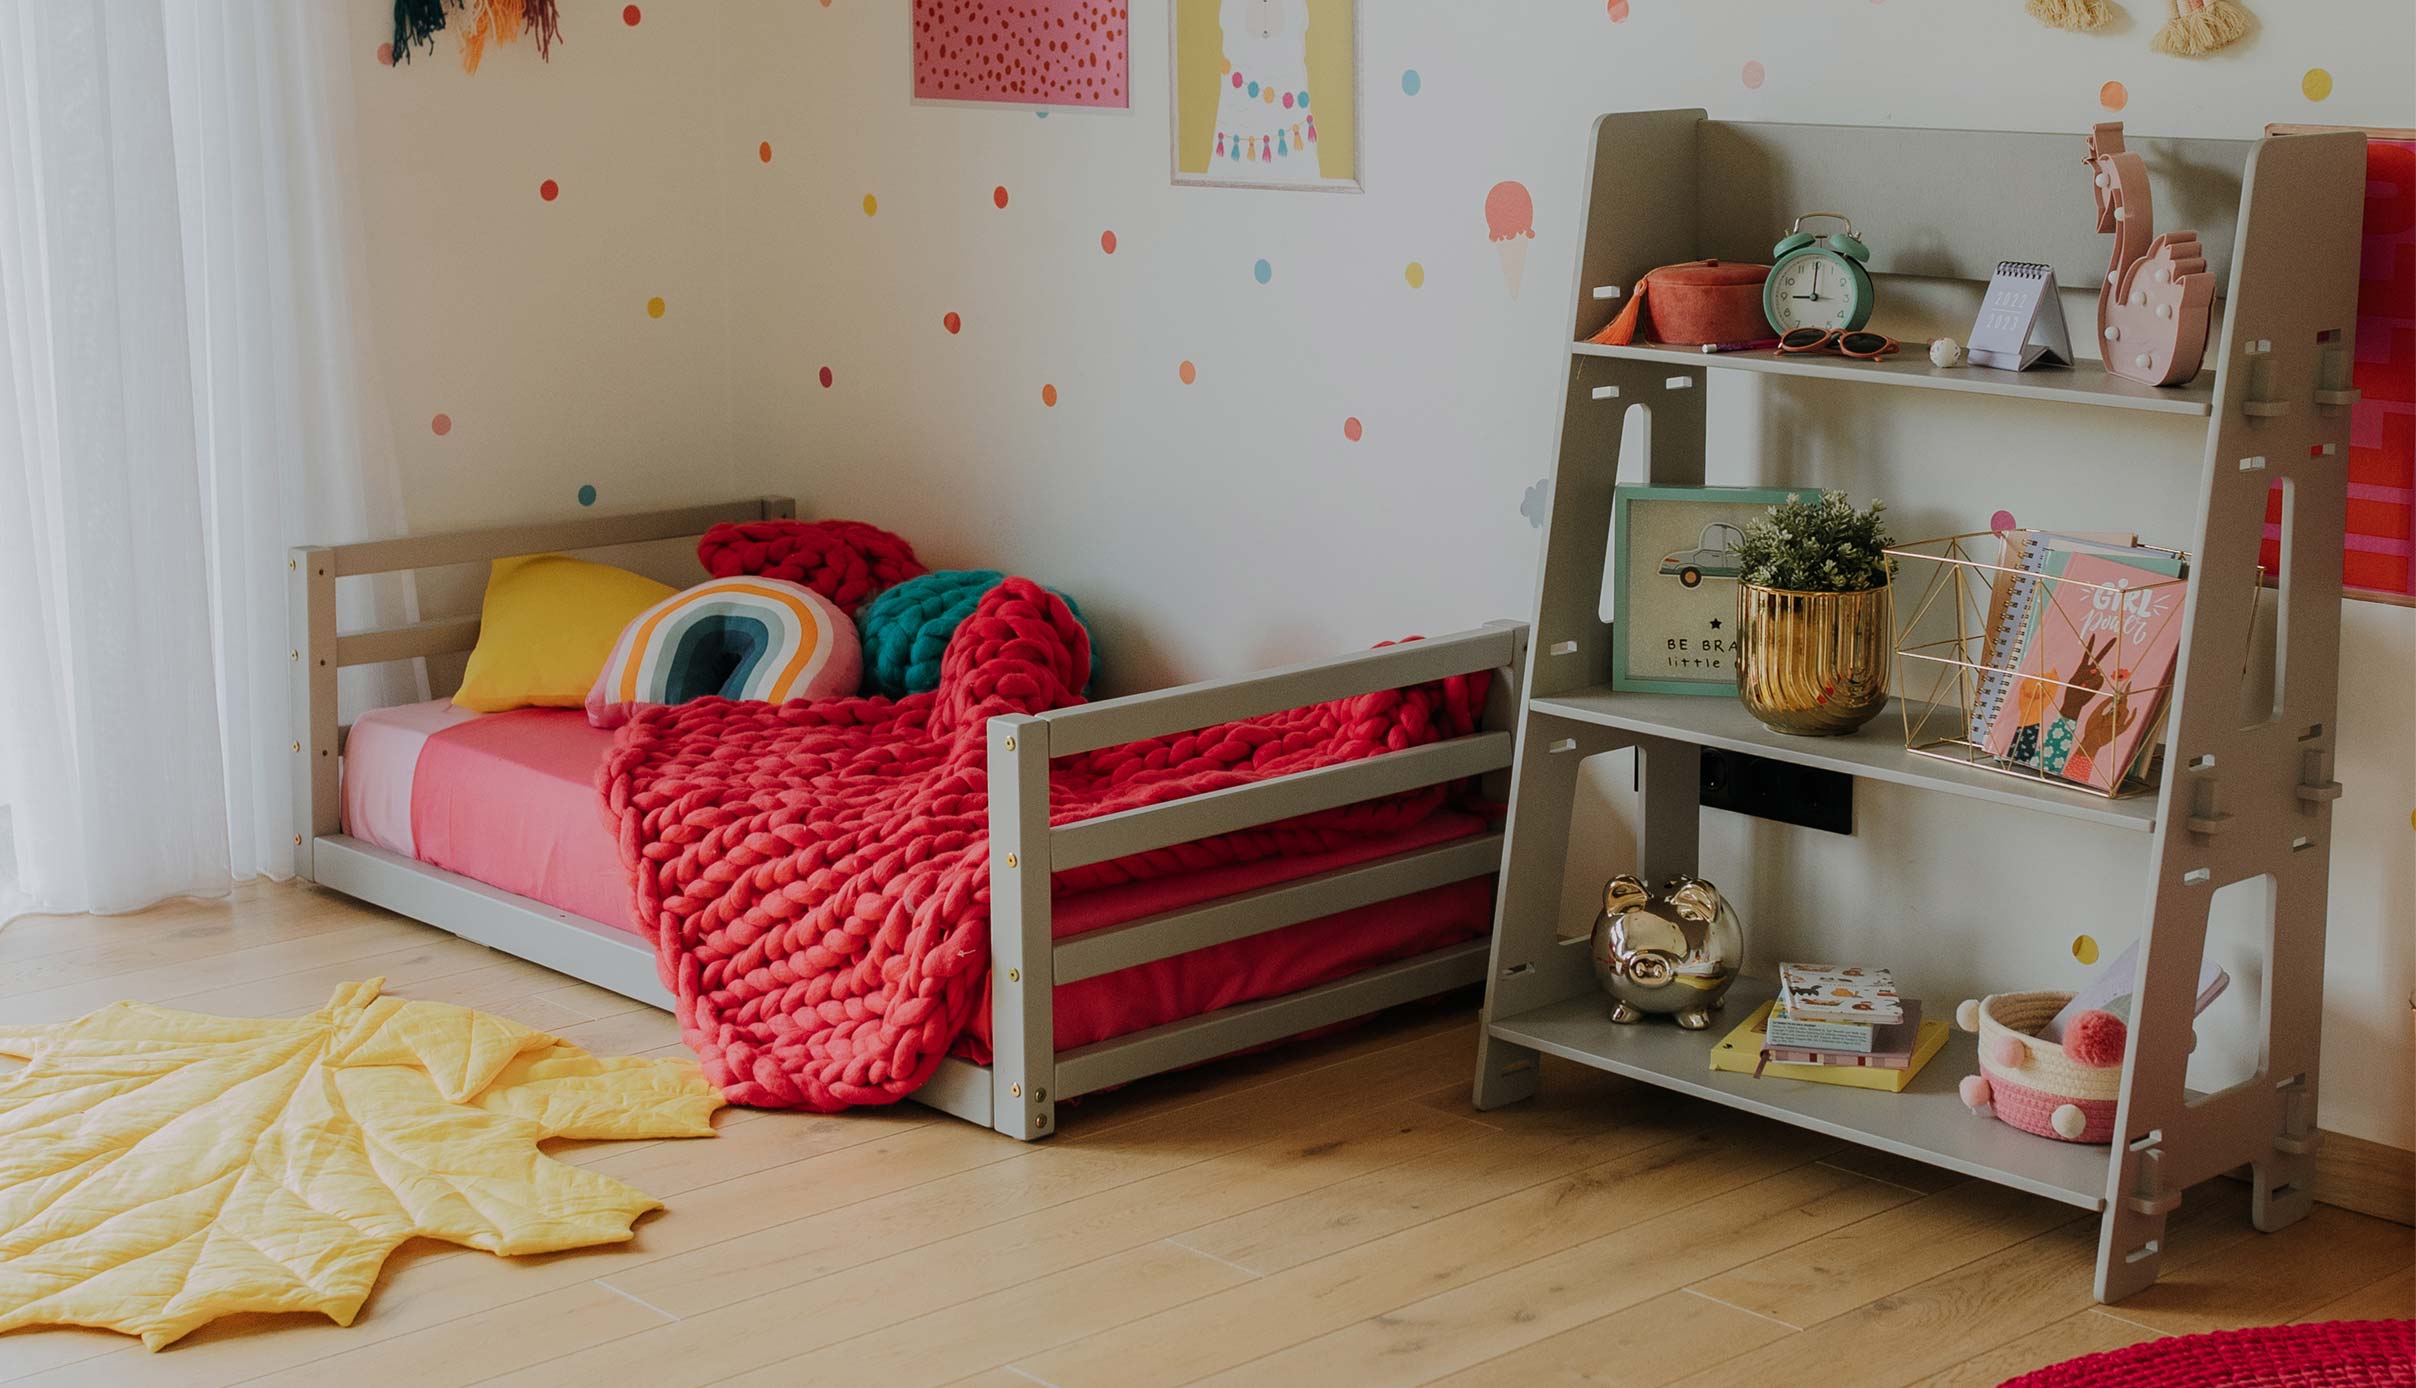 A girl's room with polka dots and a bed.